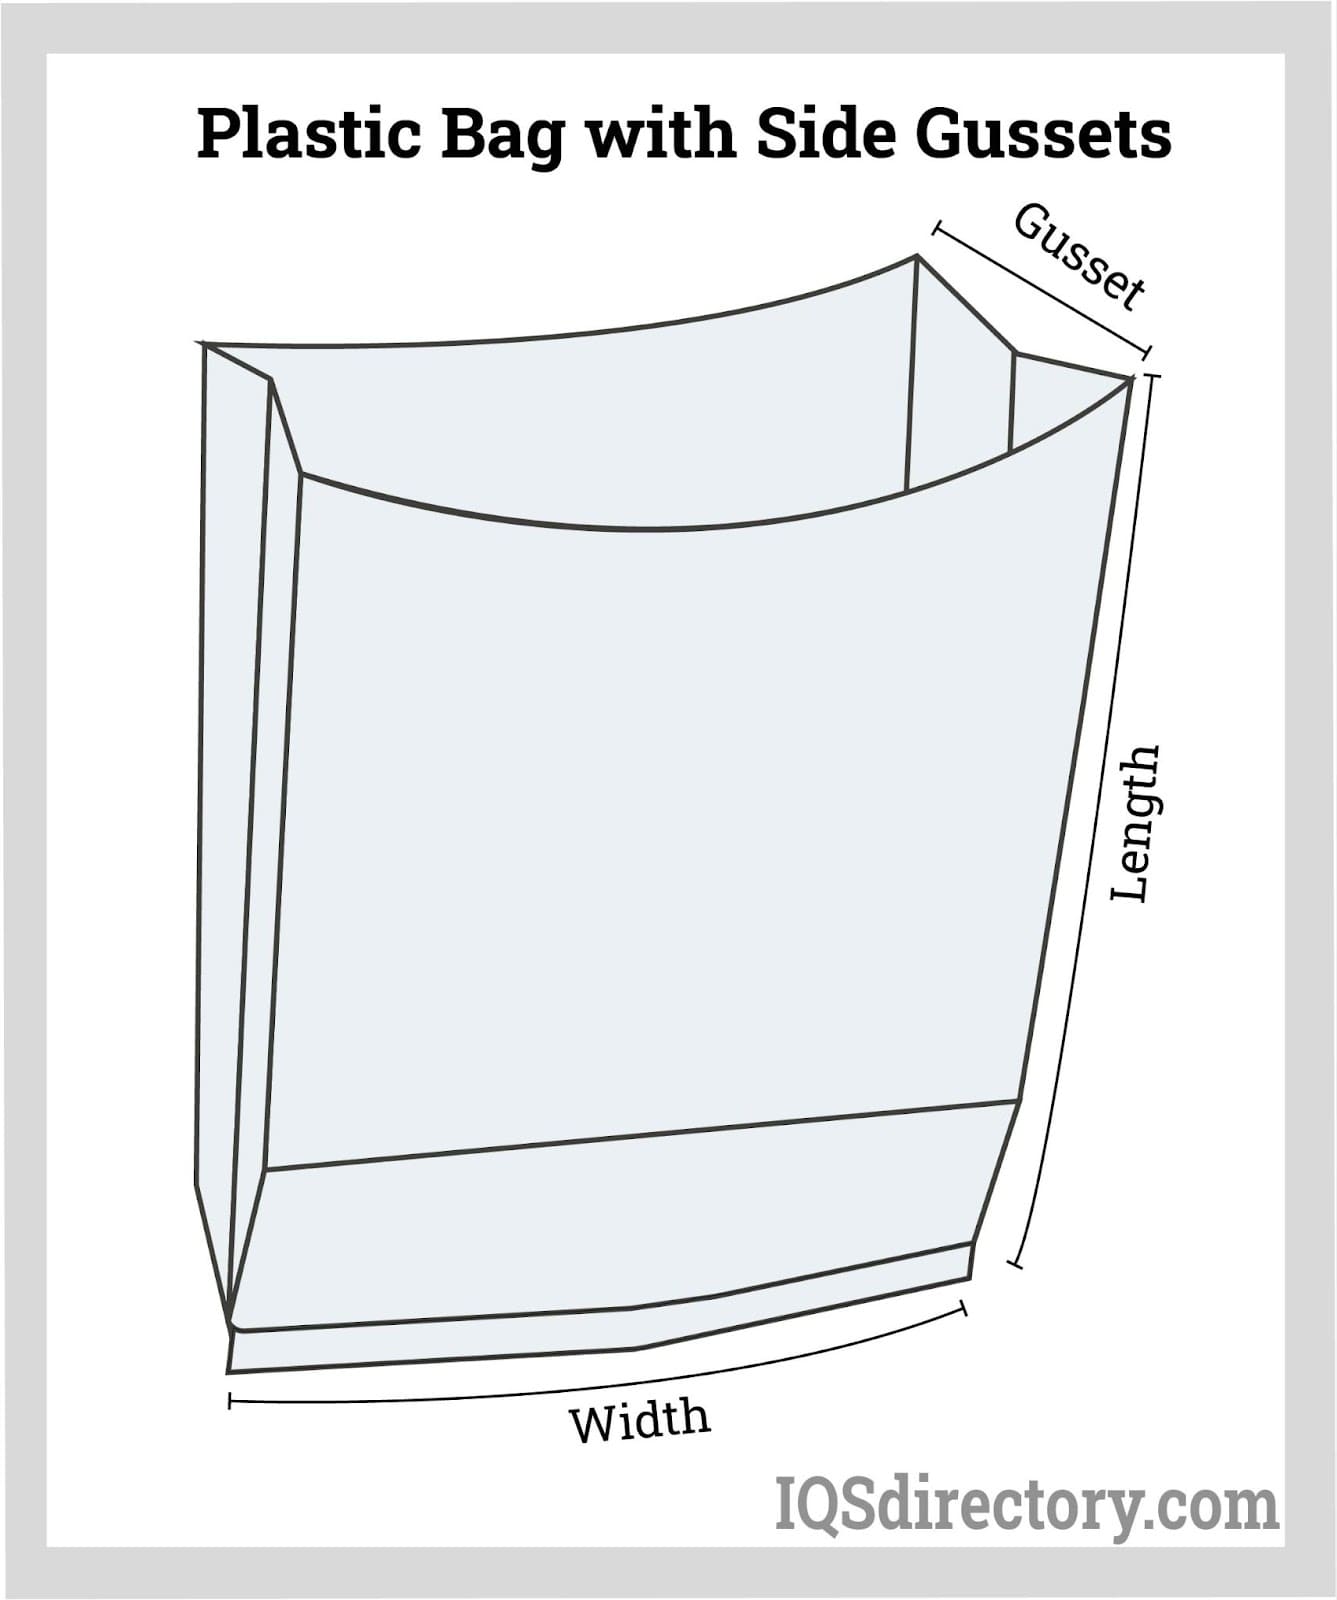 Plastic Bag with Side Gussets